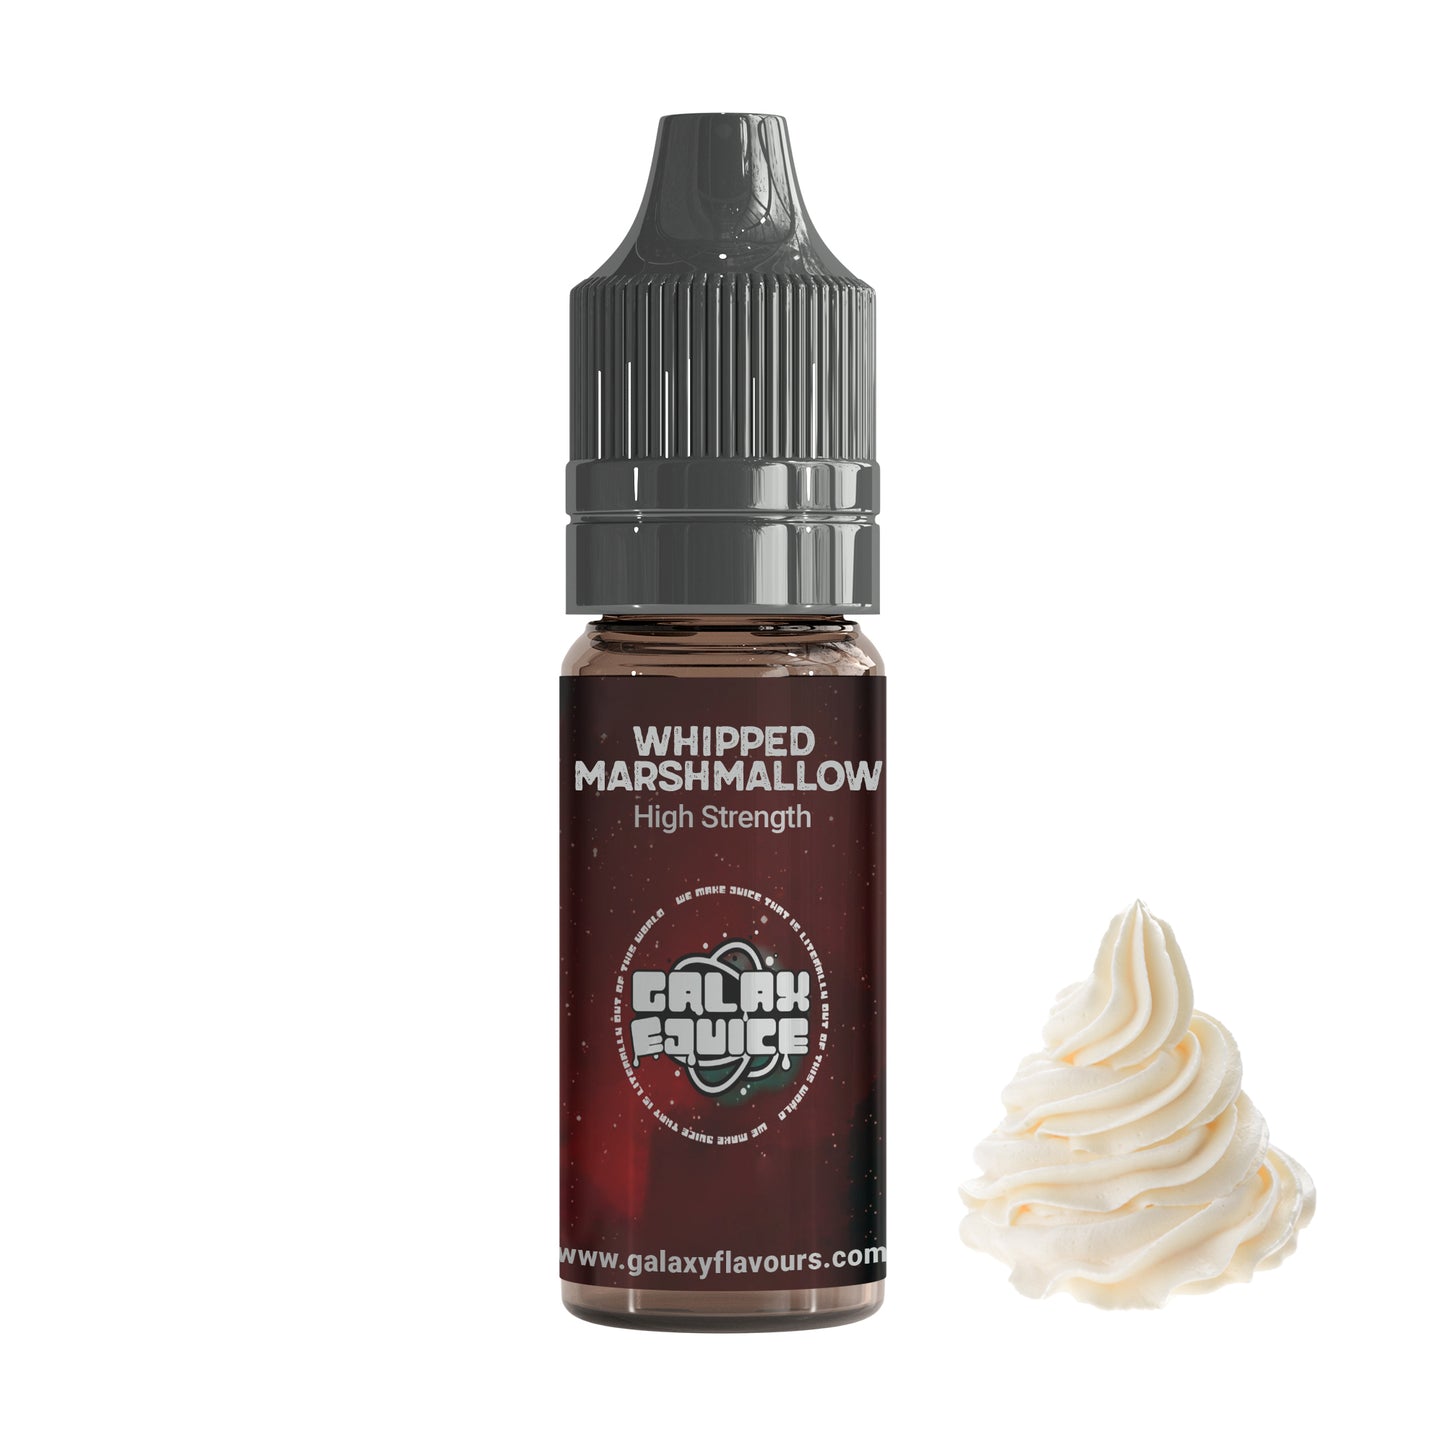 Whipped Marshmallow High Strength Professional Flavouring.